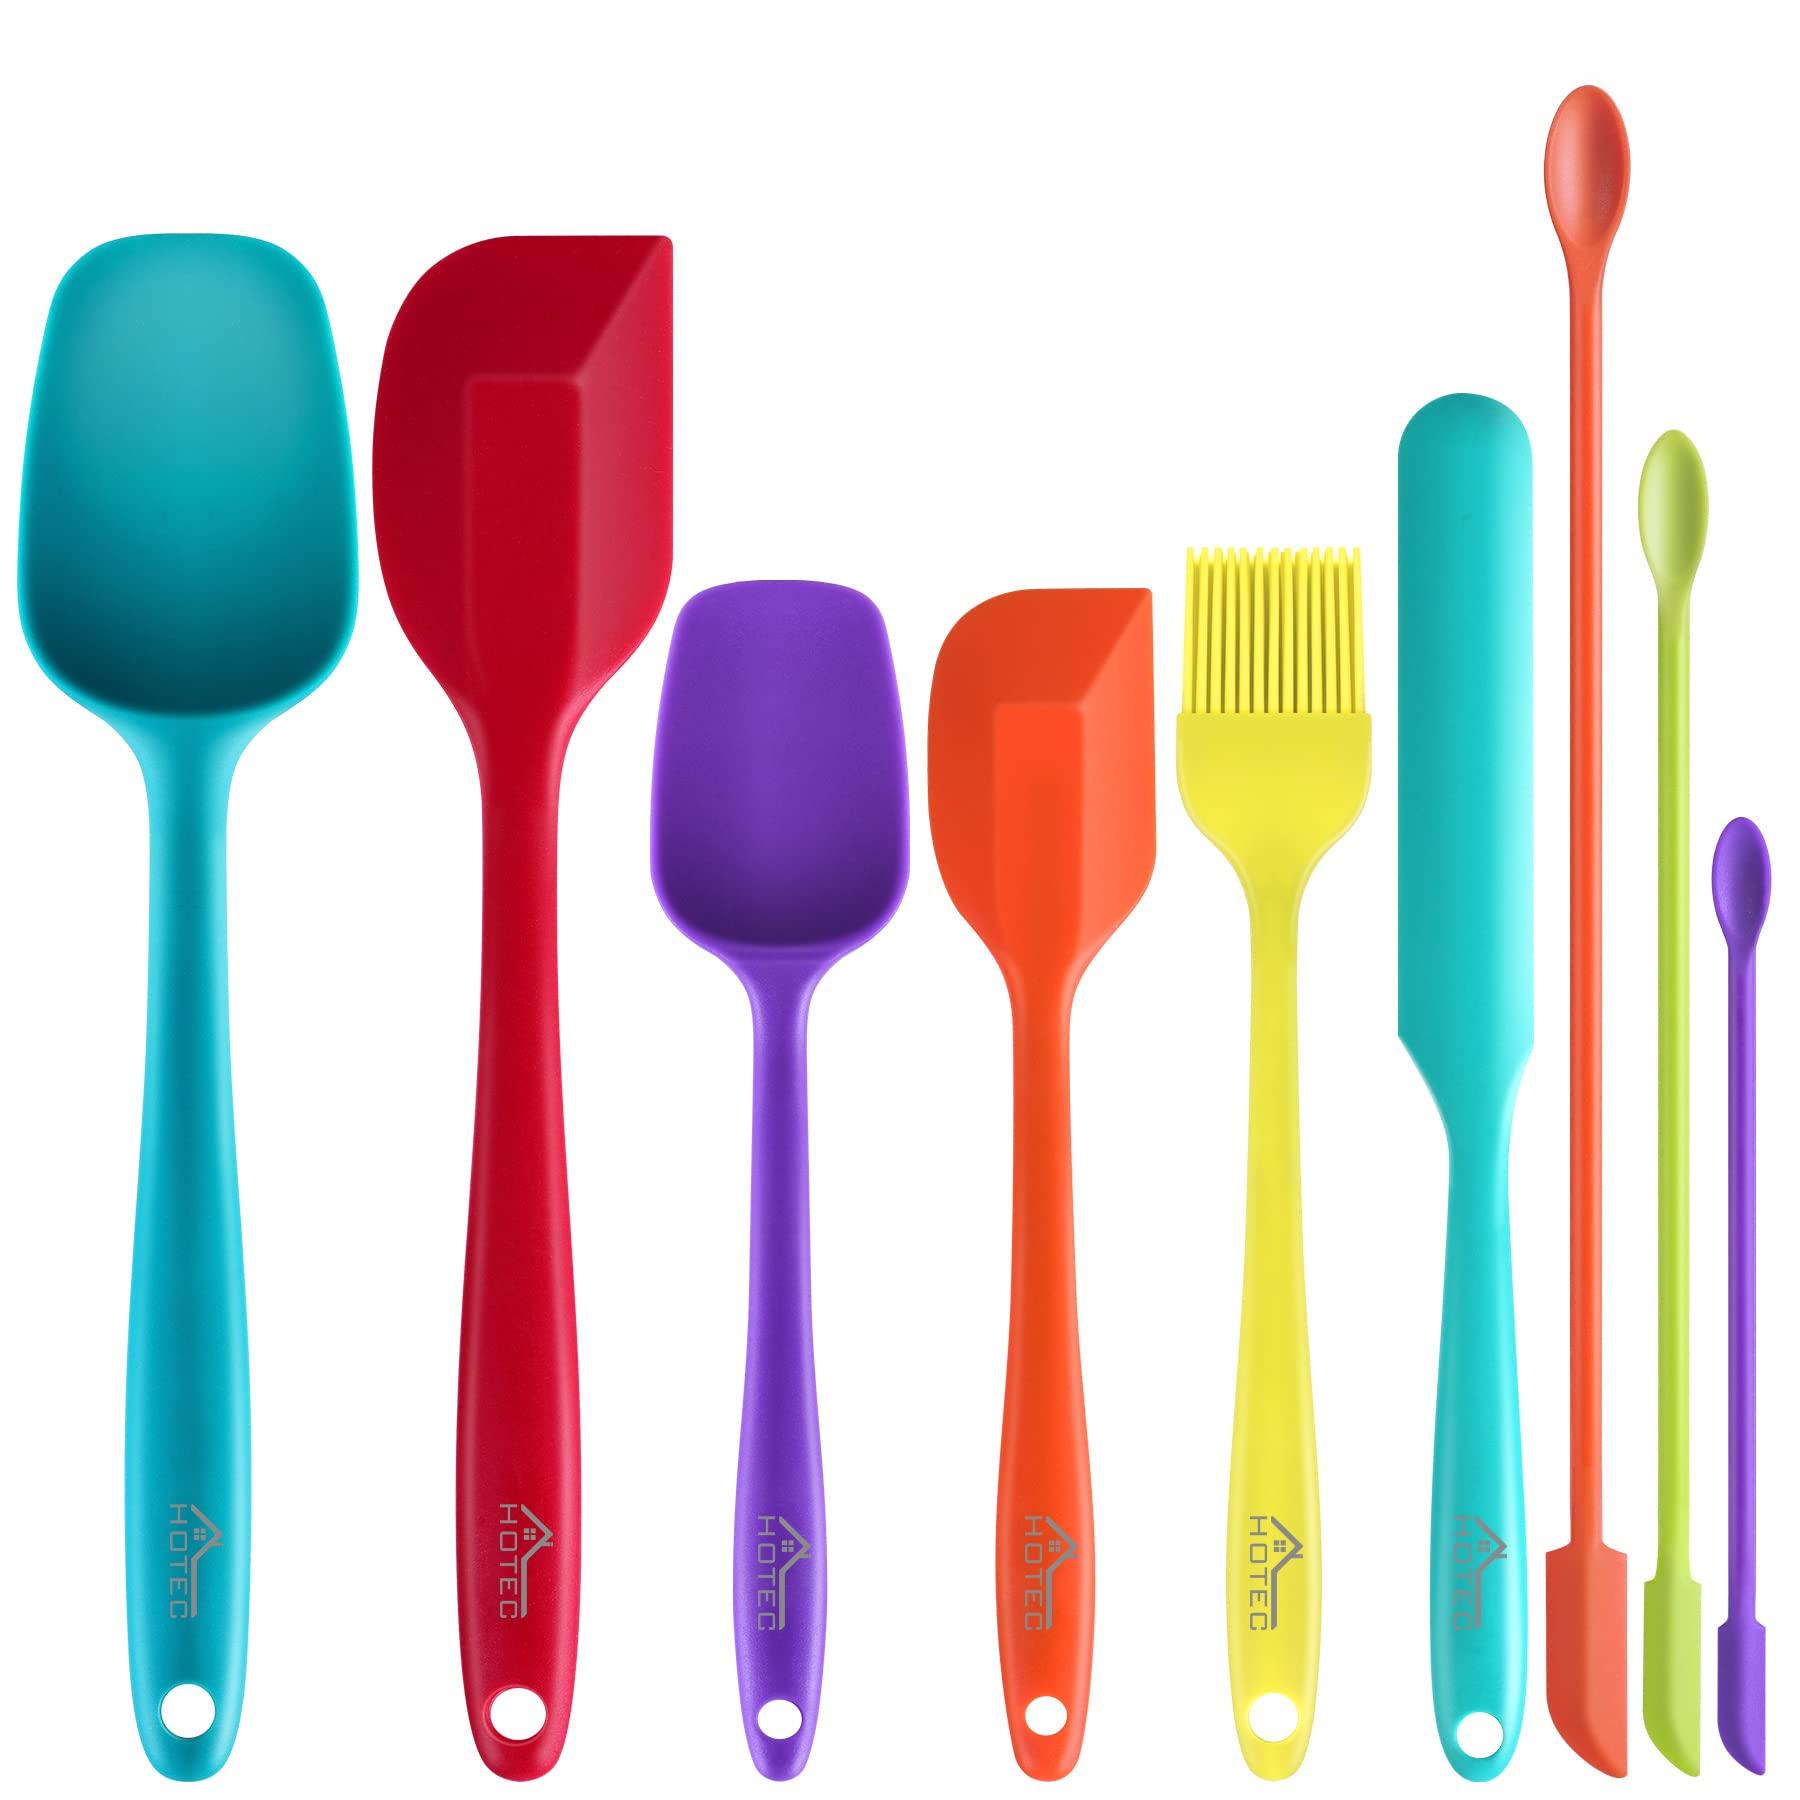 HOTEC Silicone Spatula Set Kitchen Utensils for Baking Cooking Mixing Heat Resistant Non Stick Cookware Food Grade BPA Free Dishwasher Safe (Multi-Color) Set of 9 - CookCave